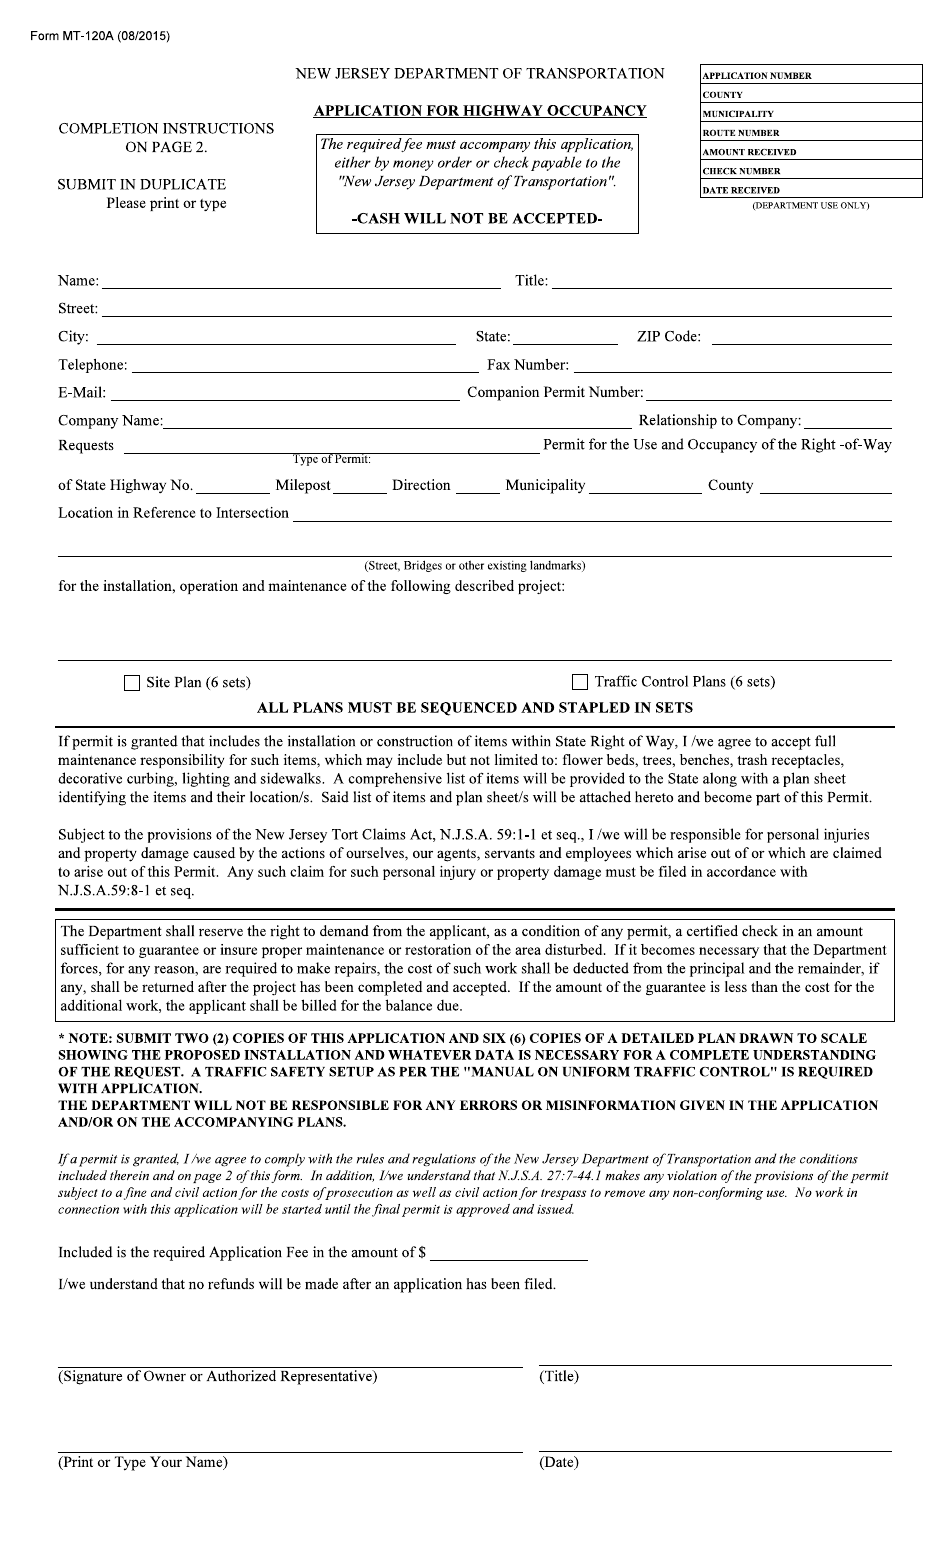 Form MT-120A Application for Highway Occupancy - New Jersey, Page 1